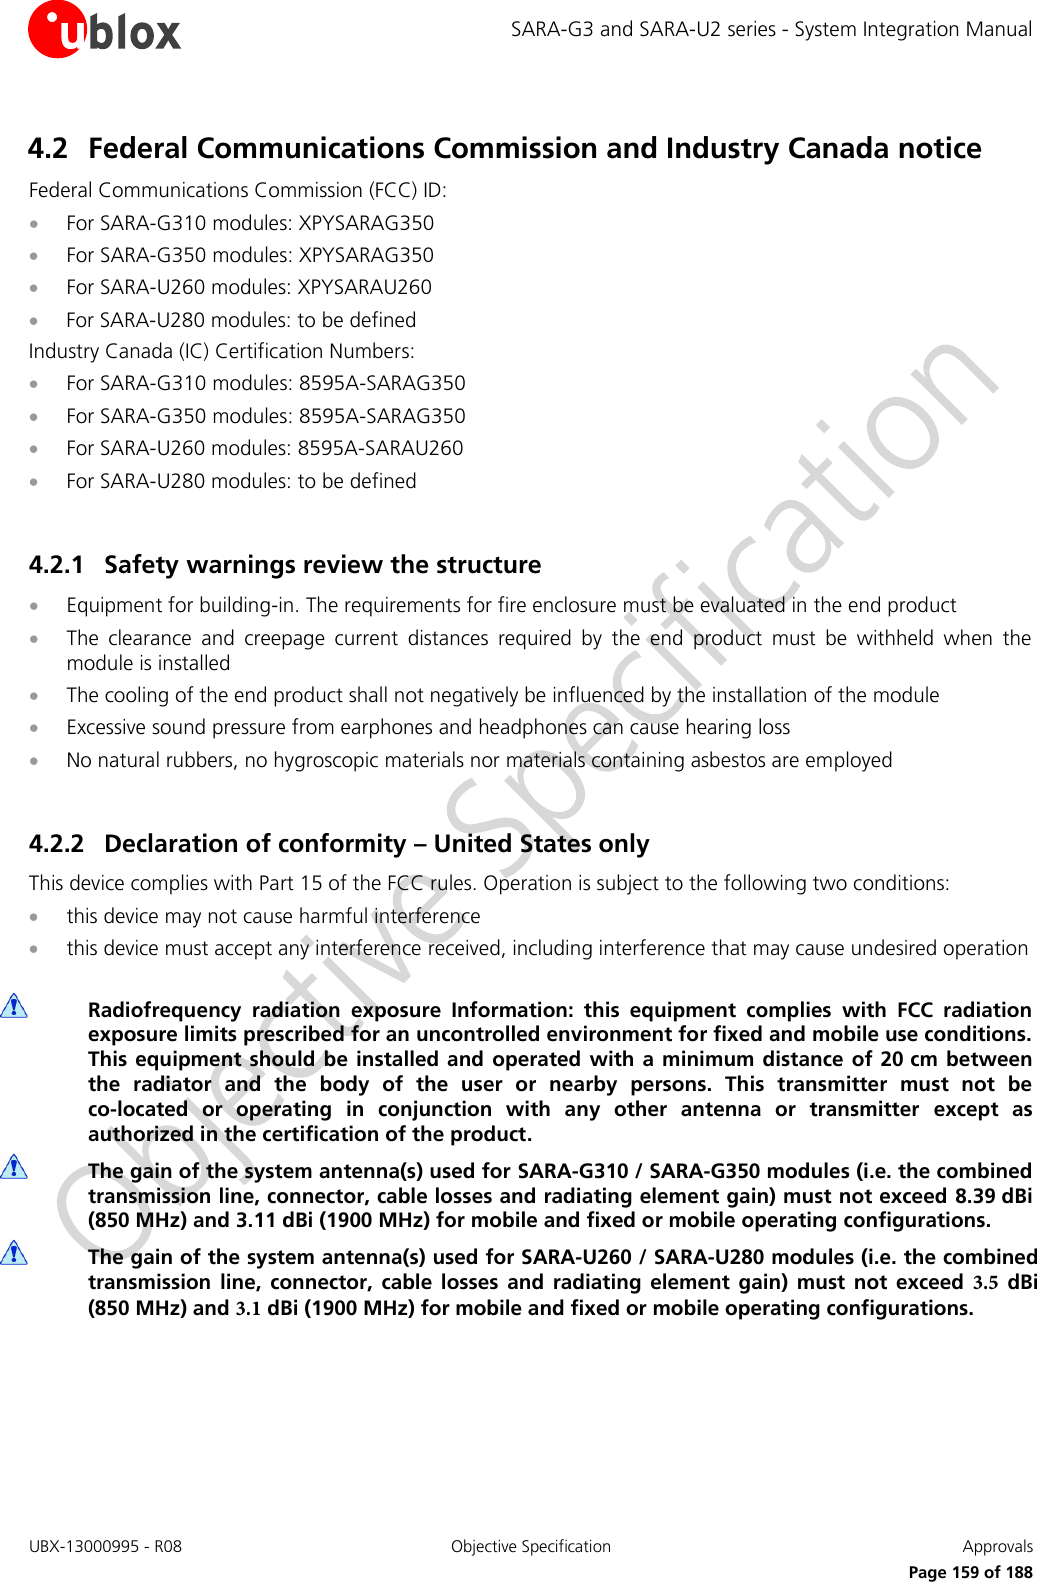 SARA-G3 and SARA-U2 series - System Integration Manual UBX-13000995 - R08  Objective Specification  Approvals Page 159 of 188 4.2 Federal Communications Commission and Industry Canada notice Federal Communications Commission (FCC) ID: For SARA-G310 modules: XPYSARAG350For SARA-G350 modules: XPYSARAG350For SARA-U260 modules: XPYSARAU260For SARA-U280 modules: to be definedIndustry Canada (IC) Certification Numbers: For SARA-G310 modules: 8595A-SARAG350For SARA-G350 modules: 8595A-SARAG350For SARA-U260 modules: 8595A-SARAU260For SARA-U280 modules: to be defined4.2.1 Safety warnings review the structure Equipment for building-in. The requirements for fire enclosure must be evaluated in the end productThe  clearance  and  creepage  current  distances  required  by  the  end  product  must  be  withheld  when  themodule is installedThe cooling of the end product shall not negatively be influenced by the installation of the moduleExcessive sound pressure from earphones and headphones can cause hearing lossNo natural rubbers, no hygroscopic materials nor materials containing asbestos are employed4.2.2 Declaration of conformity – United States only This device complies with Part 15 of the FCC rules. Operation is subject to the following two conditions: this device may not cause harmful interferencethis device must accept any interference received, including interference that may cause undesired operationRadiofrequency  radiation  exposure  Information:  this  equipment  complies  with  FCC  radiation exposure limits prescribed for an uncontrolled environment for fixed and mobile use conditions. This equipment should  be installed  and operated  with a minimum distance of 20 cm between the  radiator  and  the  body  of  the  user  or  nearby  persons.  This  transmitter  must  not  be co-located  or  operating  in  conjunction  with  any  other  antenna  or  transmitter  except  as authorized in the certification of the product. The gain of the system antenna(s) used for SARA-G310 / SARA-G350 modules (i.e. the combined transmission line, connector, cable losses and radiating element gain) must not exceed 8.39 dBi (850 MHz) and 3.11 dBi (1900 MHz) for mobile and fixed or mobile operating configurations. The gain of the system antenna(s) used for SARA-U260 / SARA-U280 modules (i.e. the combined transmission  line,  connector,  cable  losses  and  radiating  element gain)  must  not exceed  3.5  dBi (850 MHz) and 3.1 dBi (1900 MHz) for mobile and fixed or mobile operating configurations.